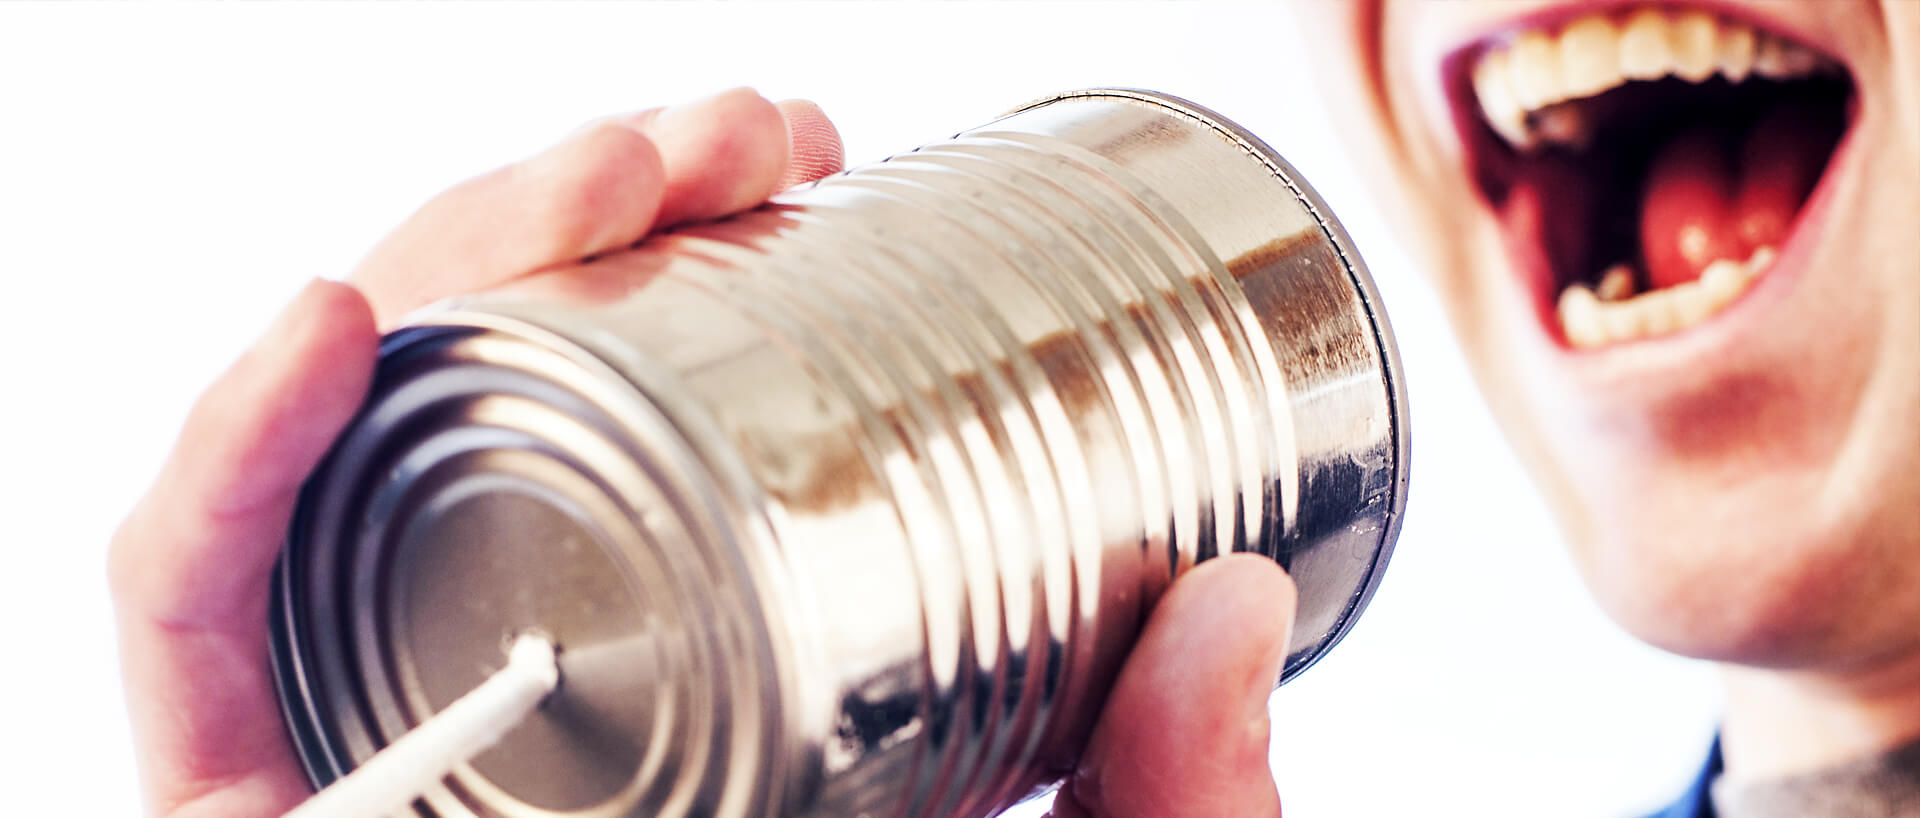 Someone yelling into a tin can telephone